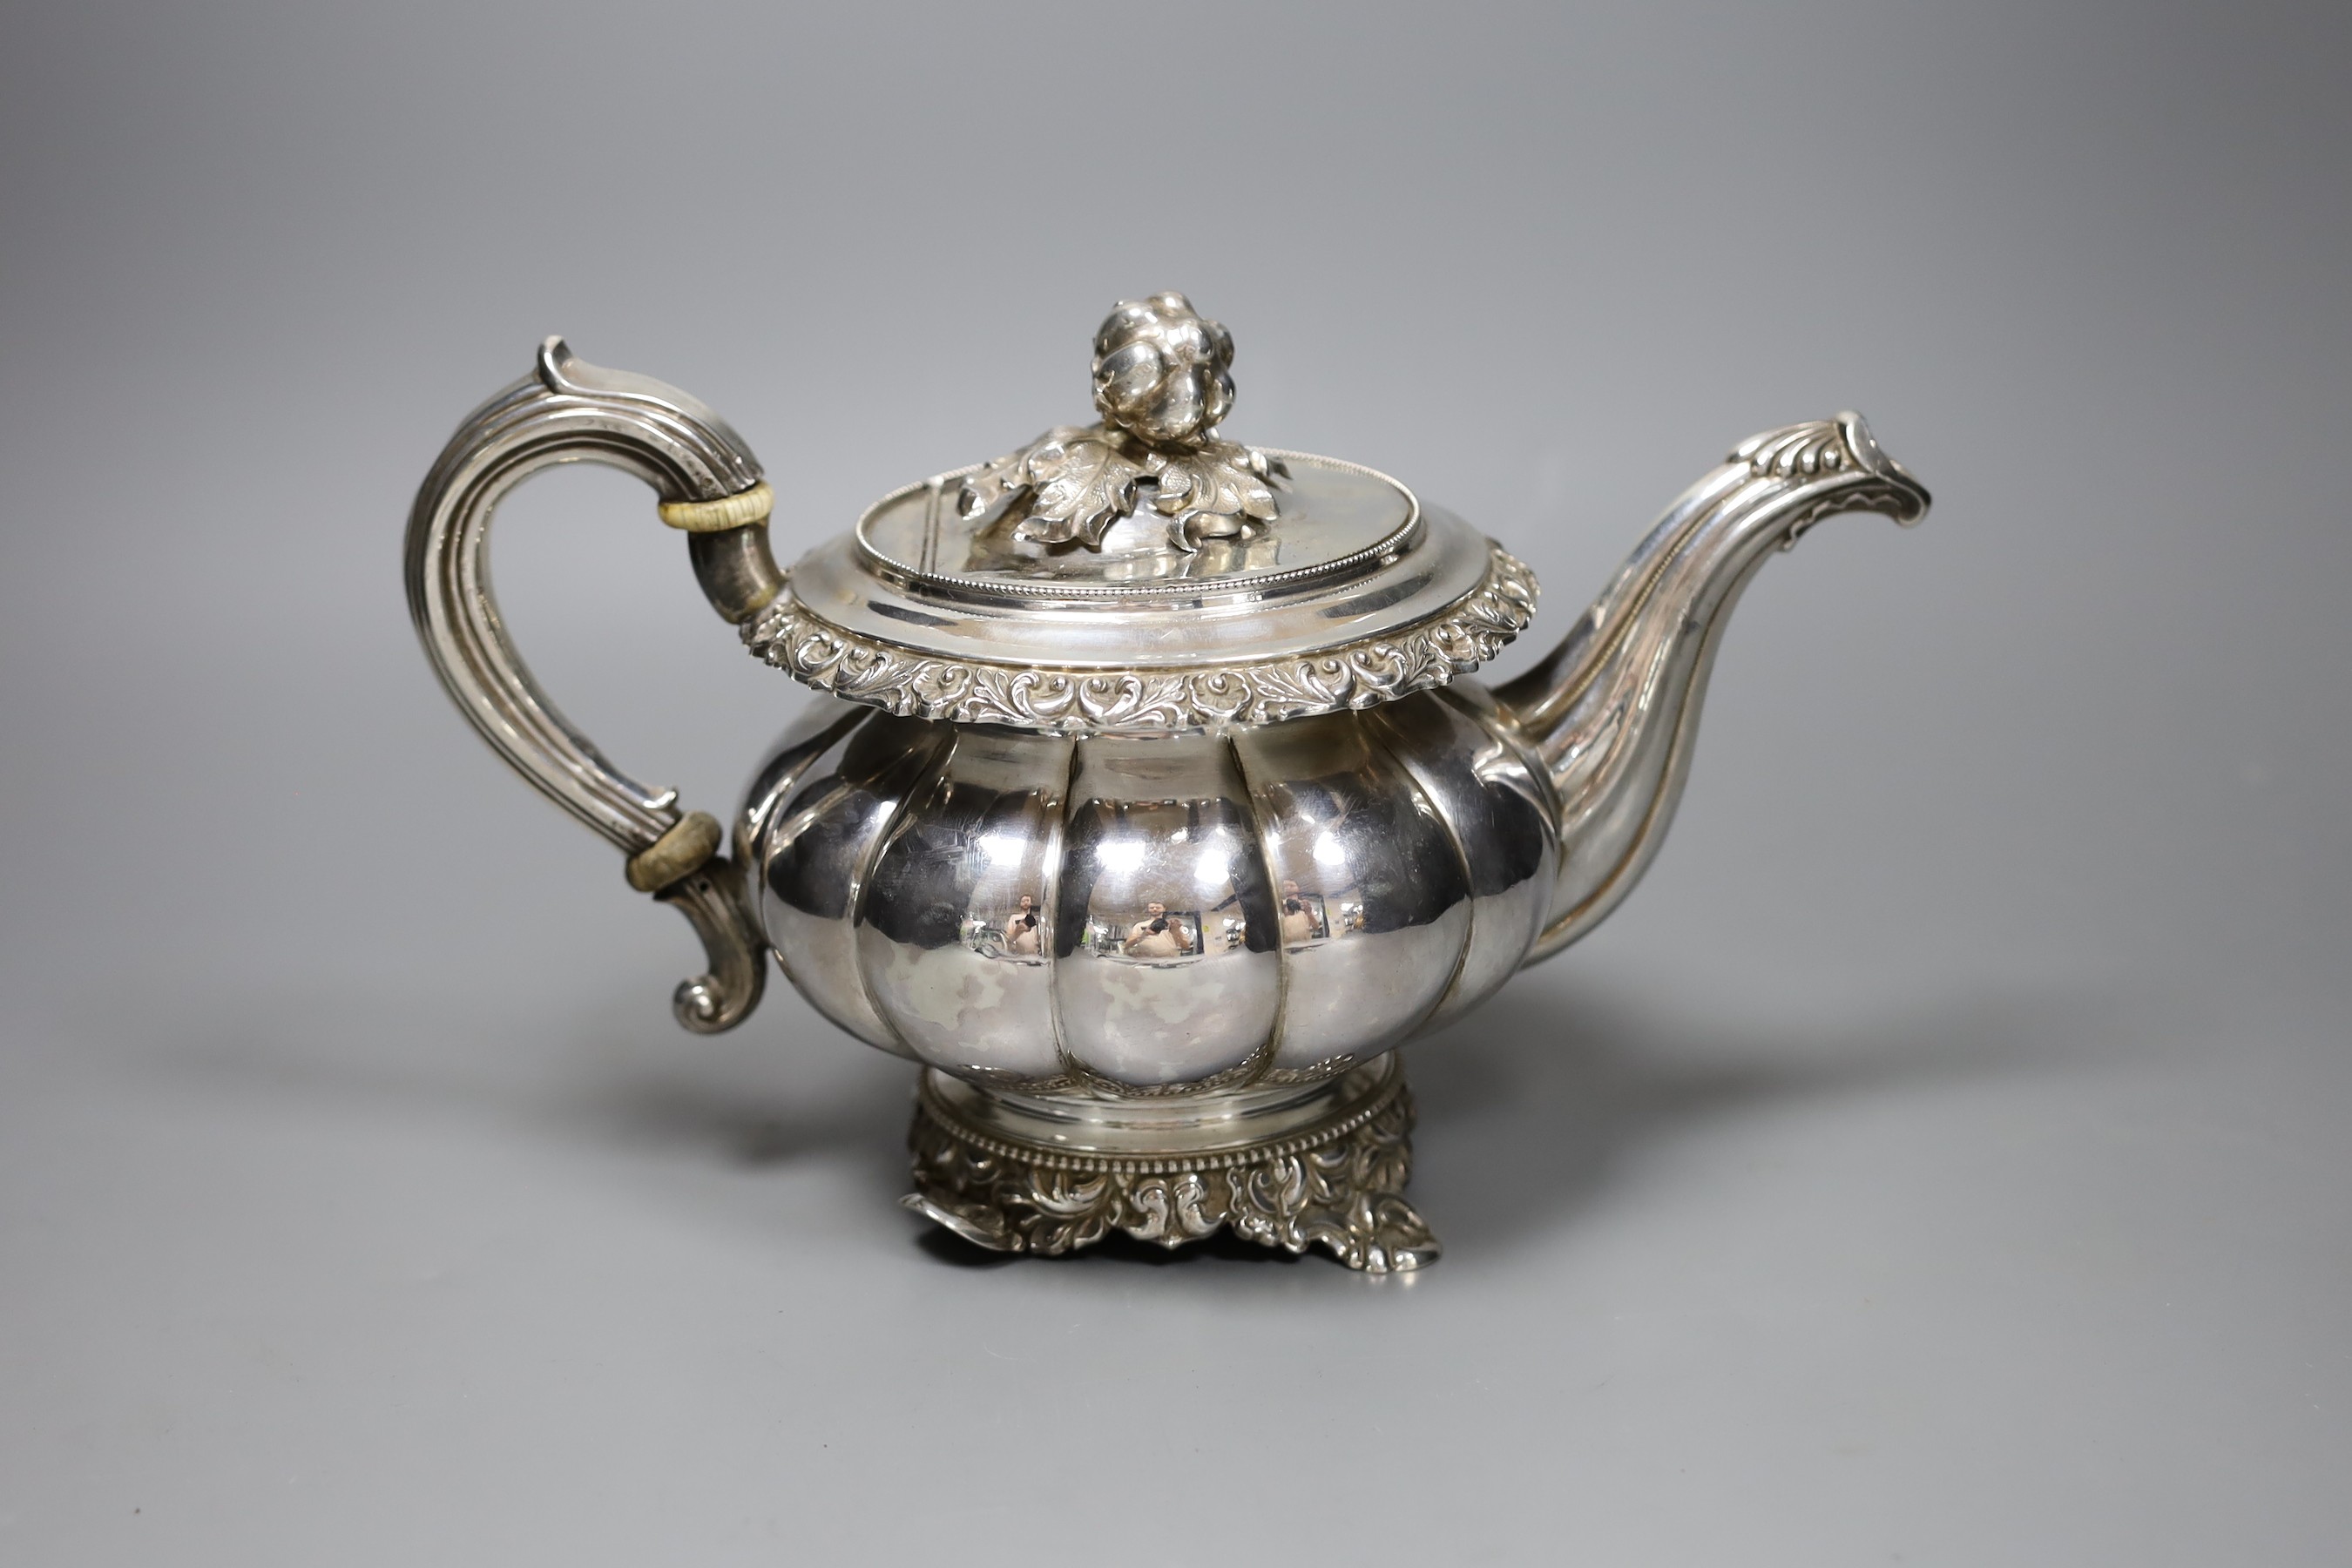 A 19th century Continental white metal teapot, with fruit finial, bone isolators and scroll feet, (a.f.), gross 24 oz.